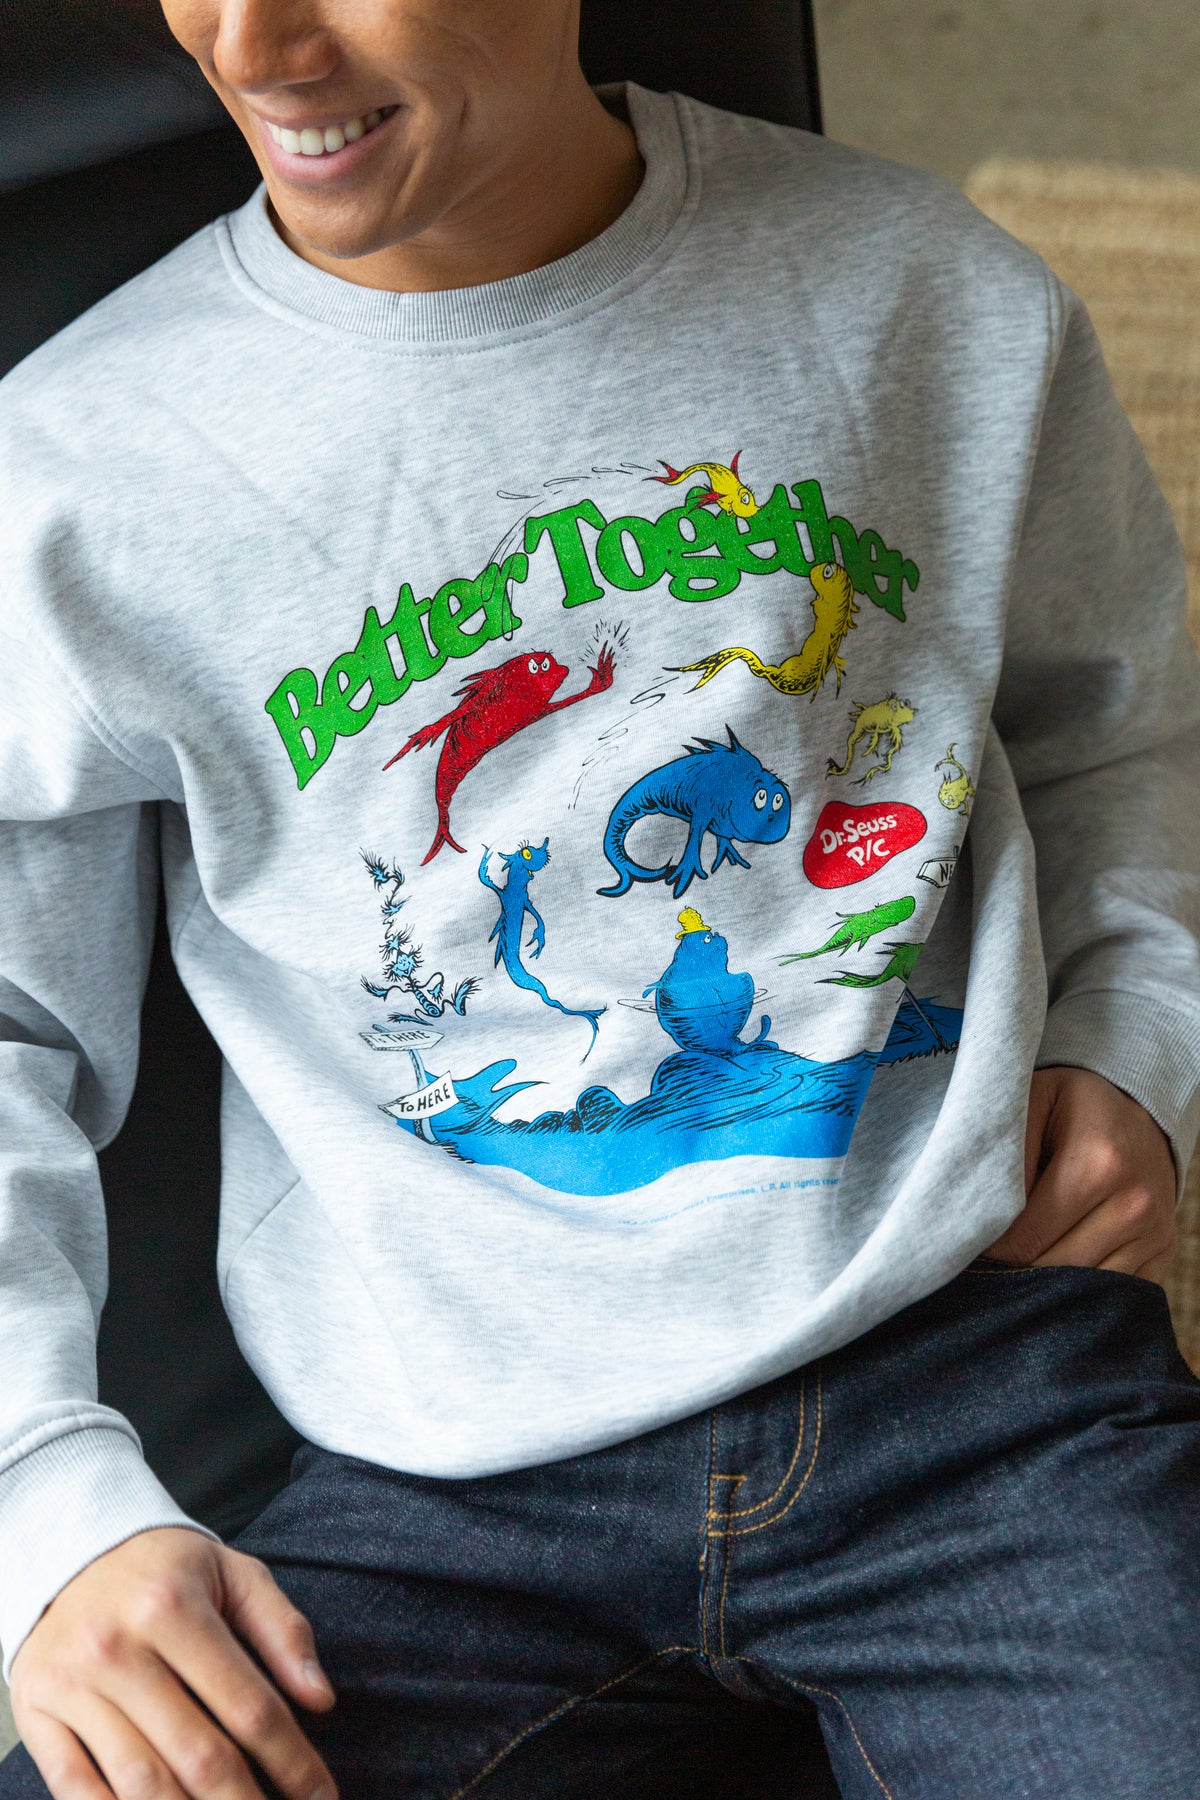 One Fish Two Fish Better Together Crewneck - Ash